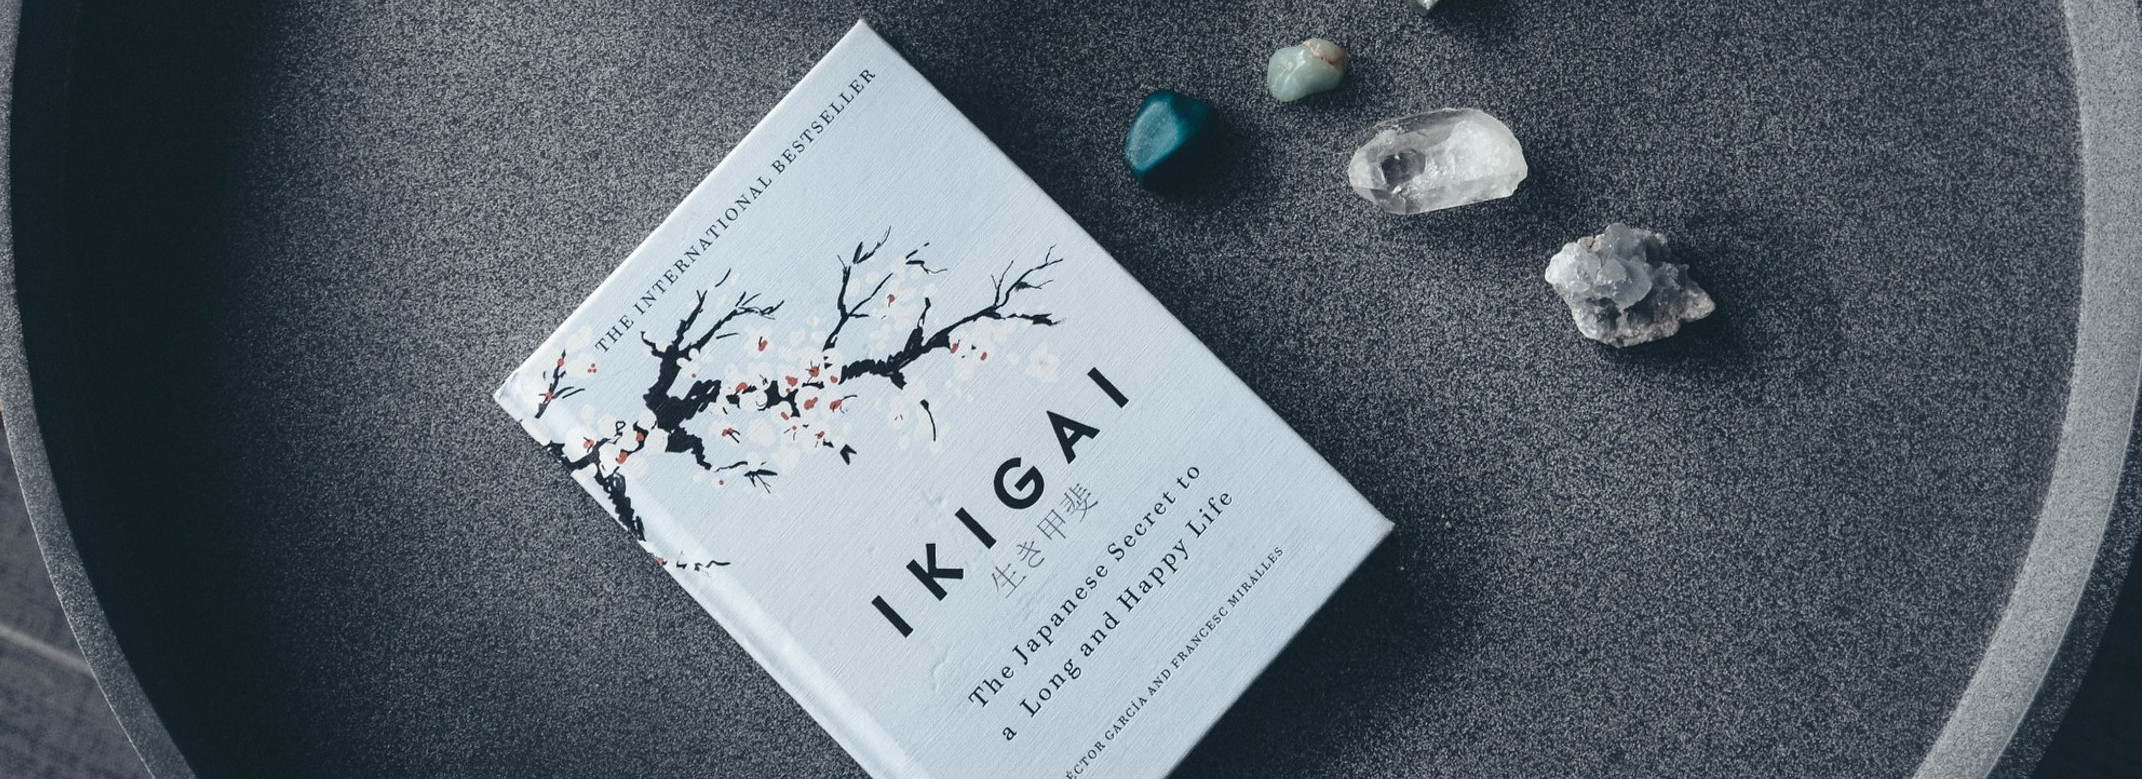 IKIGAI: The japanese secret to a long and happy life